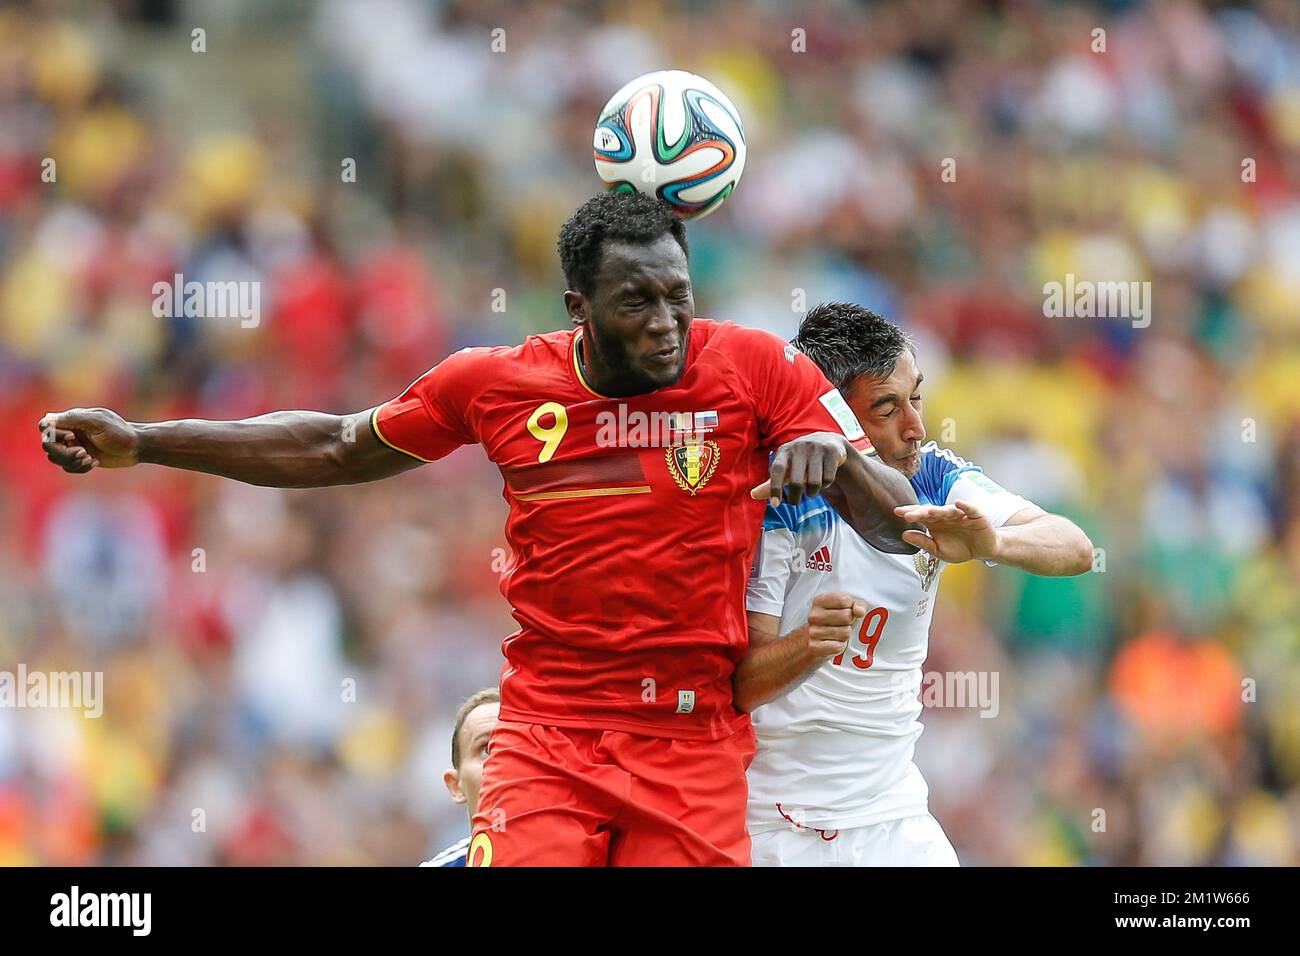 20140622 - RIO DE JANEIRO, BRAZIL: Belgium's Romelu Lukaku and Russia's Aleksandr Samedov fight for the ball during a soccer game between Belgian national team The Red Devils and Russia in Rio de Janeiro, Brazil, the second game in Group H of the first round of the 2014 FIFA World Cup, Sunday 22 June 2014. BELGA PHOTO BRUNO FAHY Stock Photo